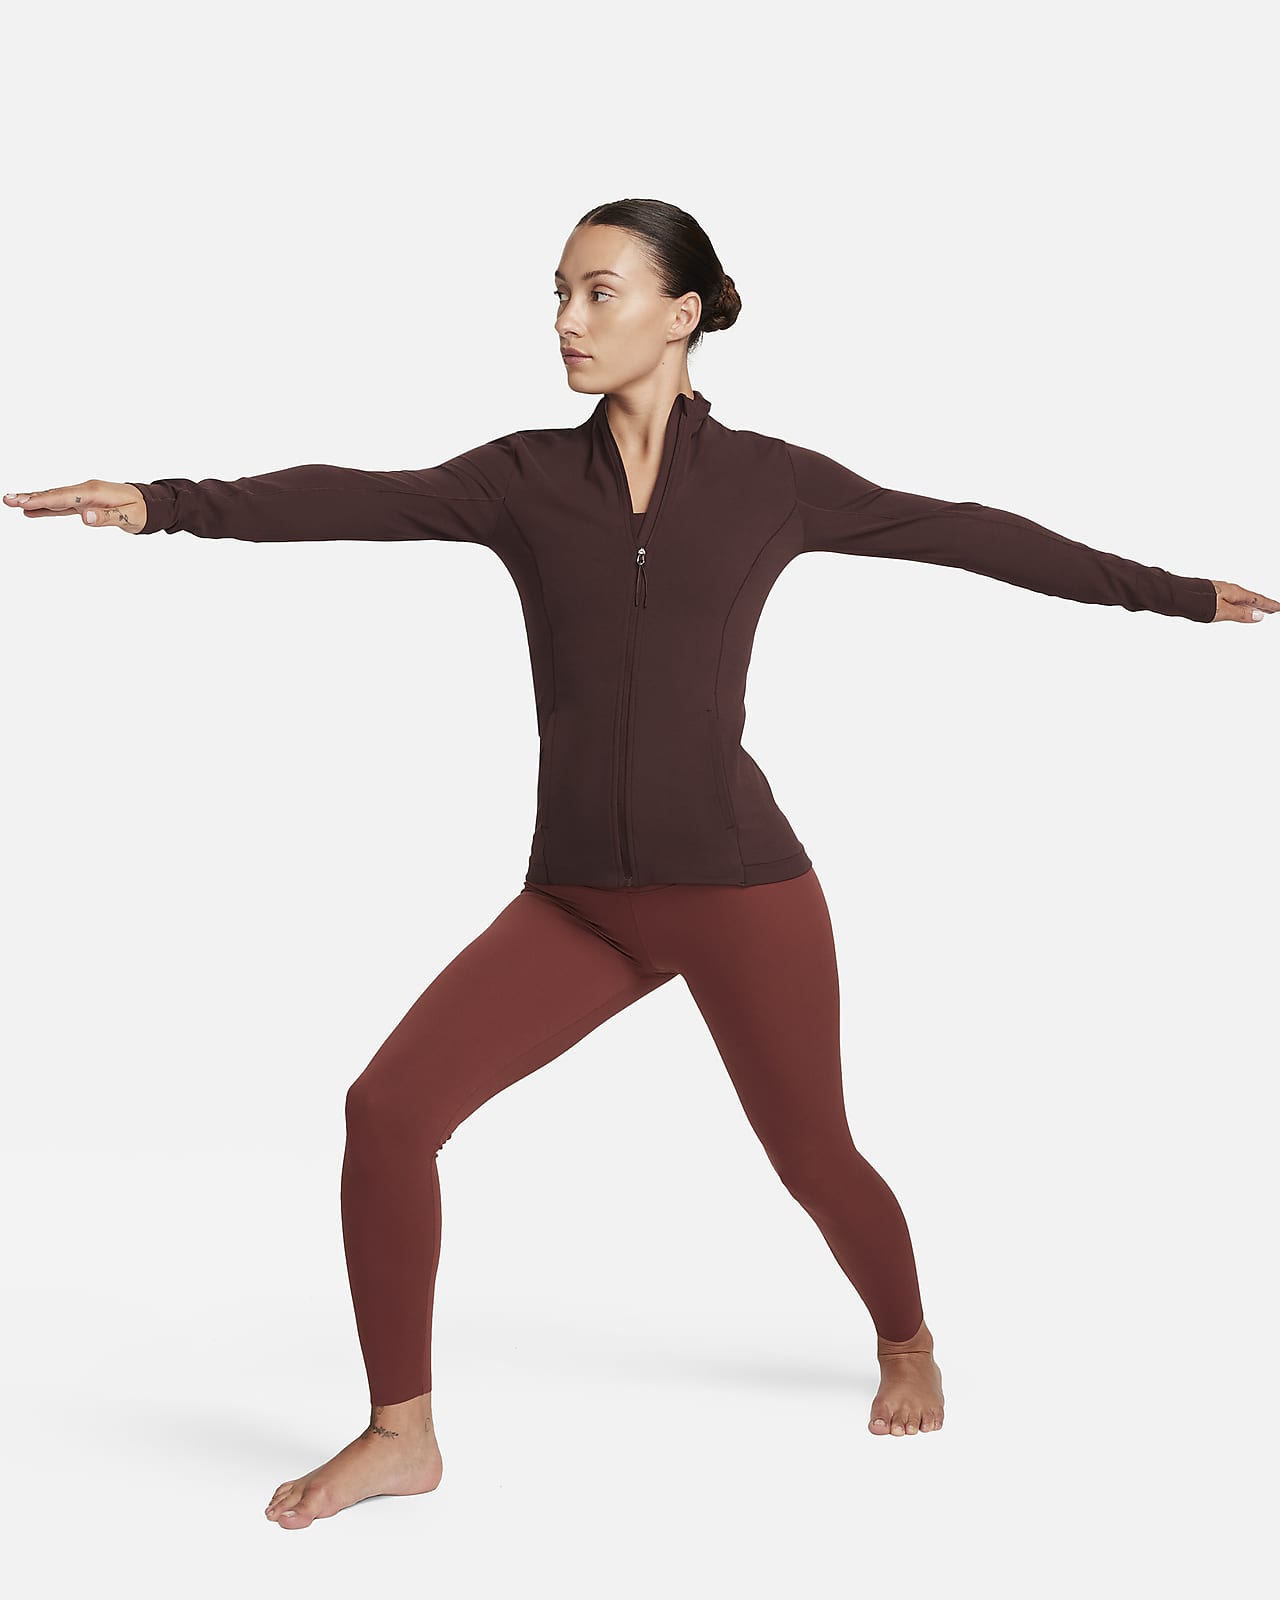 Nike Yoga Dri-FIT Luxe Women's Fitted Jacket.